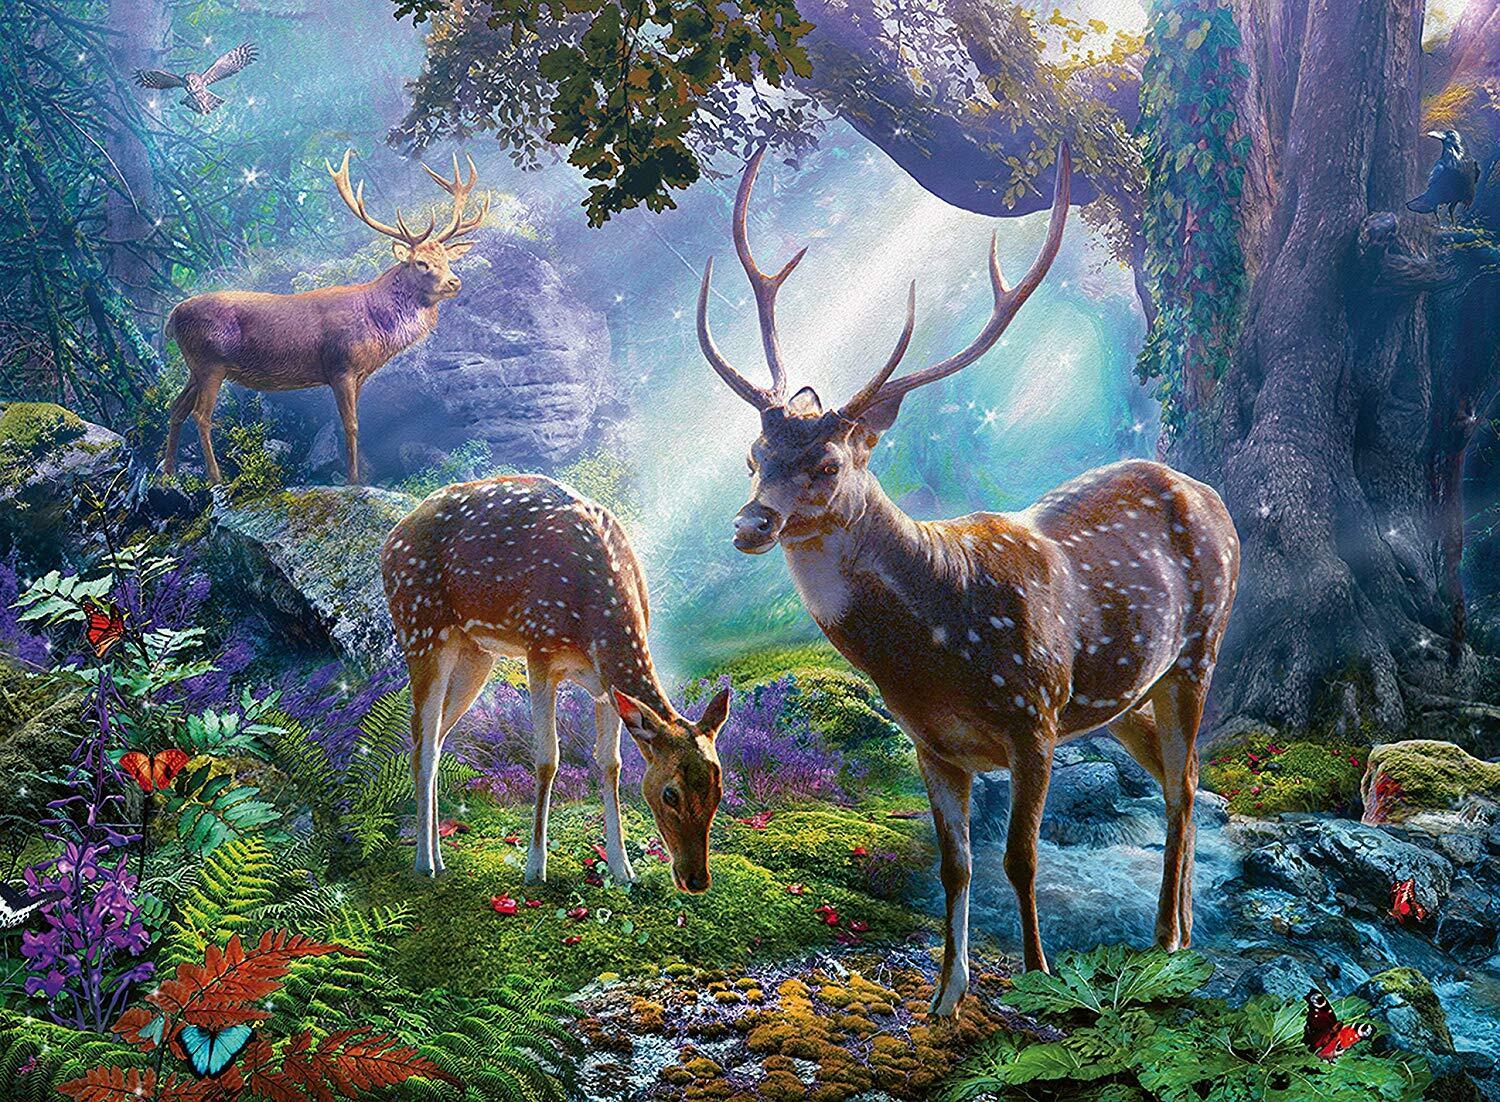 Puzzles 14828 Ravensburger Deer In The Wild Jigsaw Puzzle 500 Pieces Age 10 Years En6249708 3266